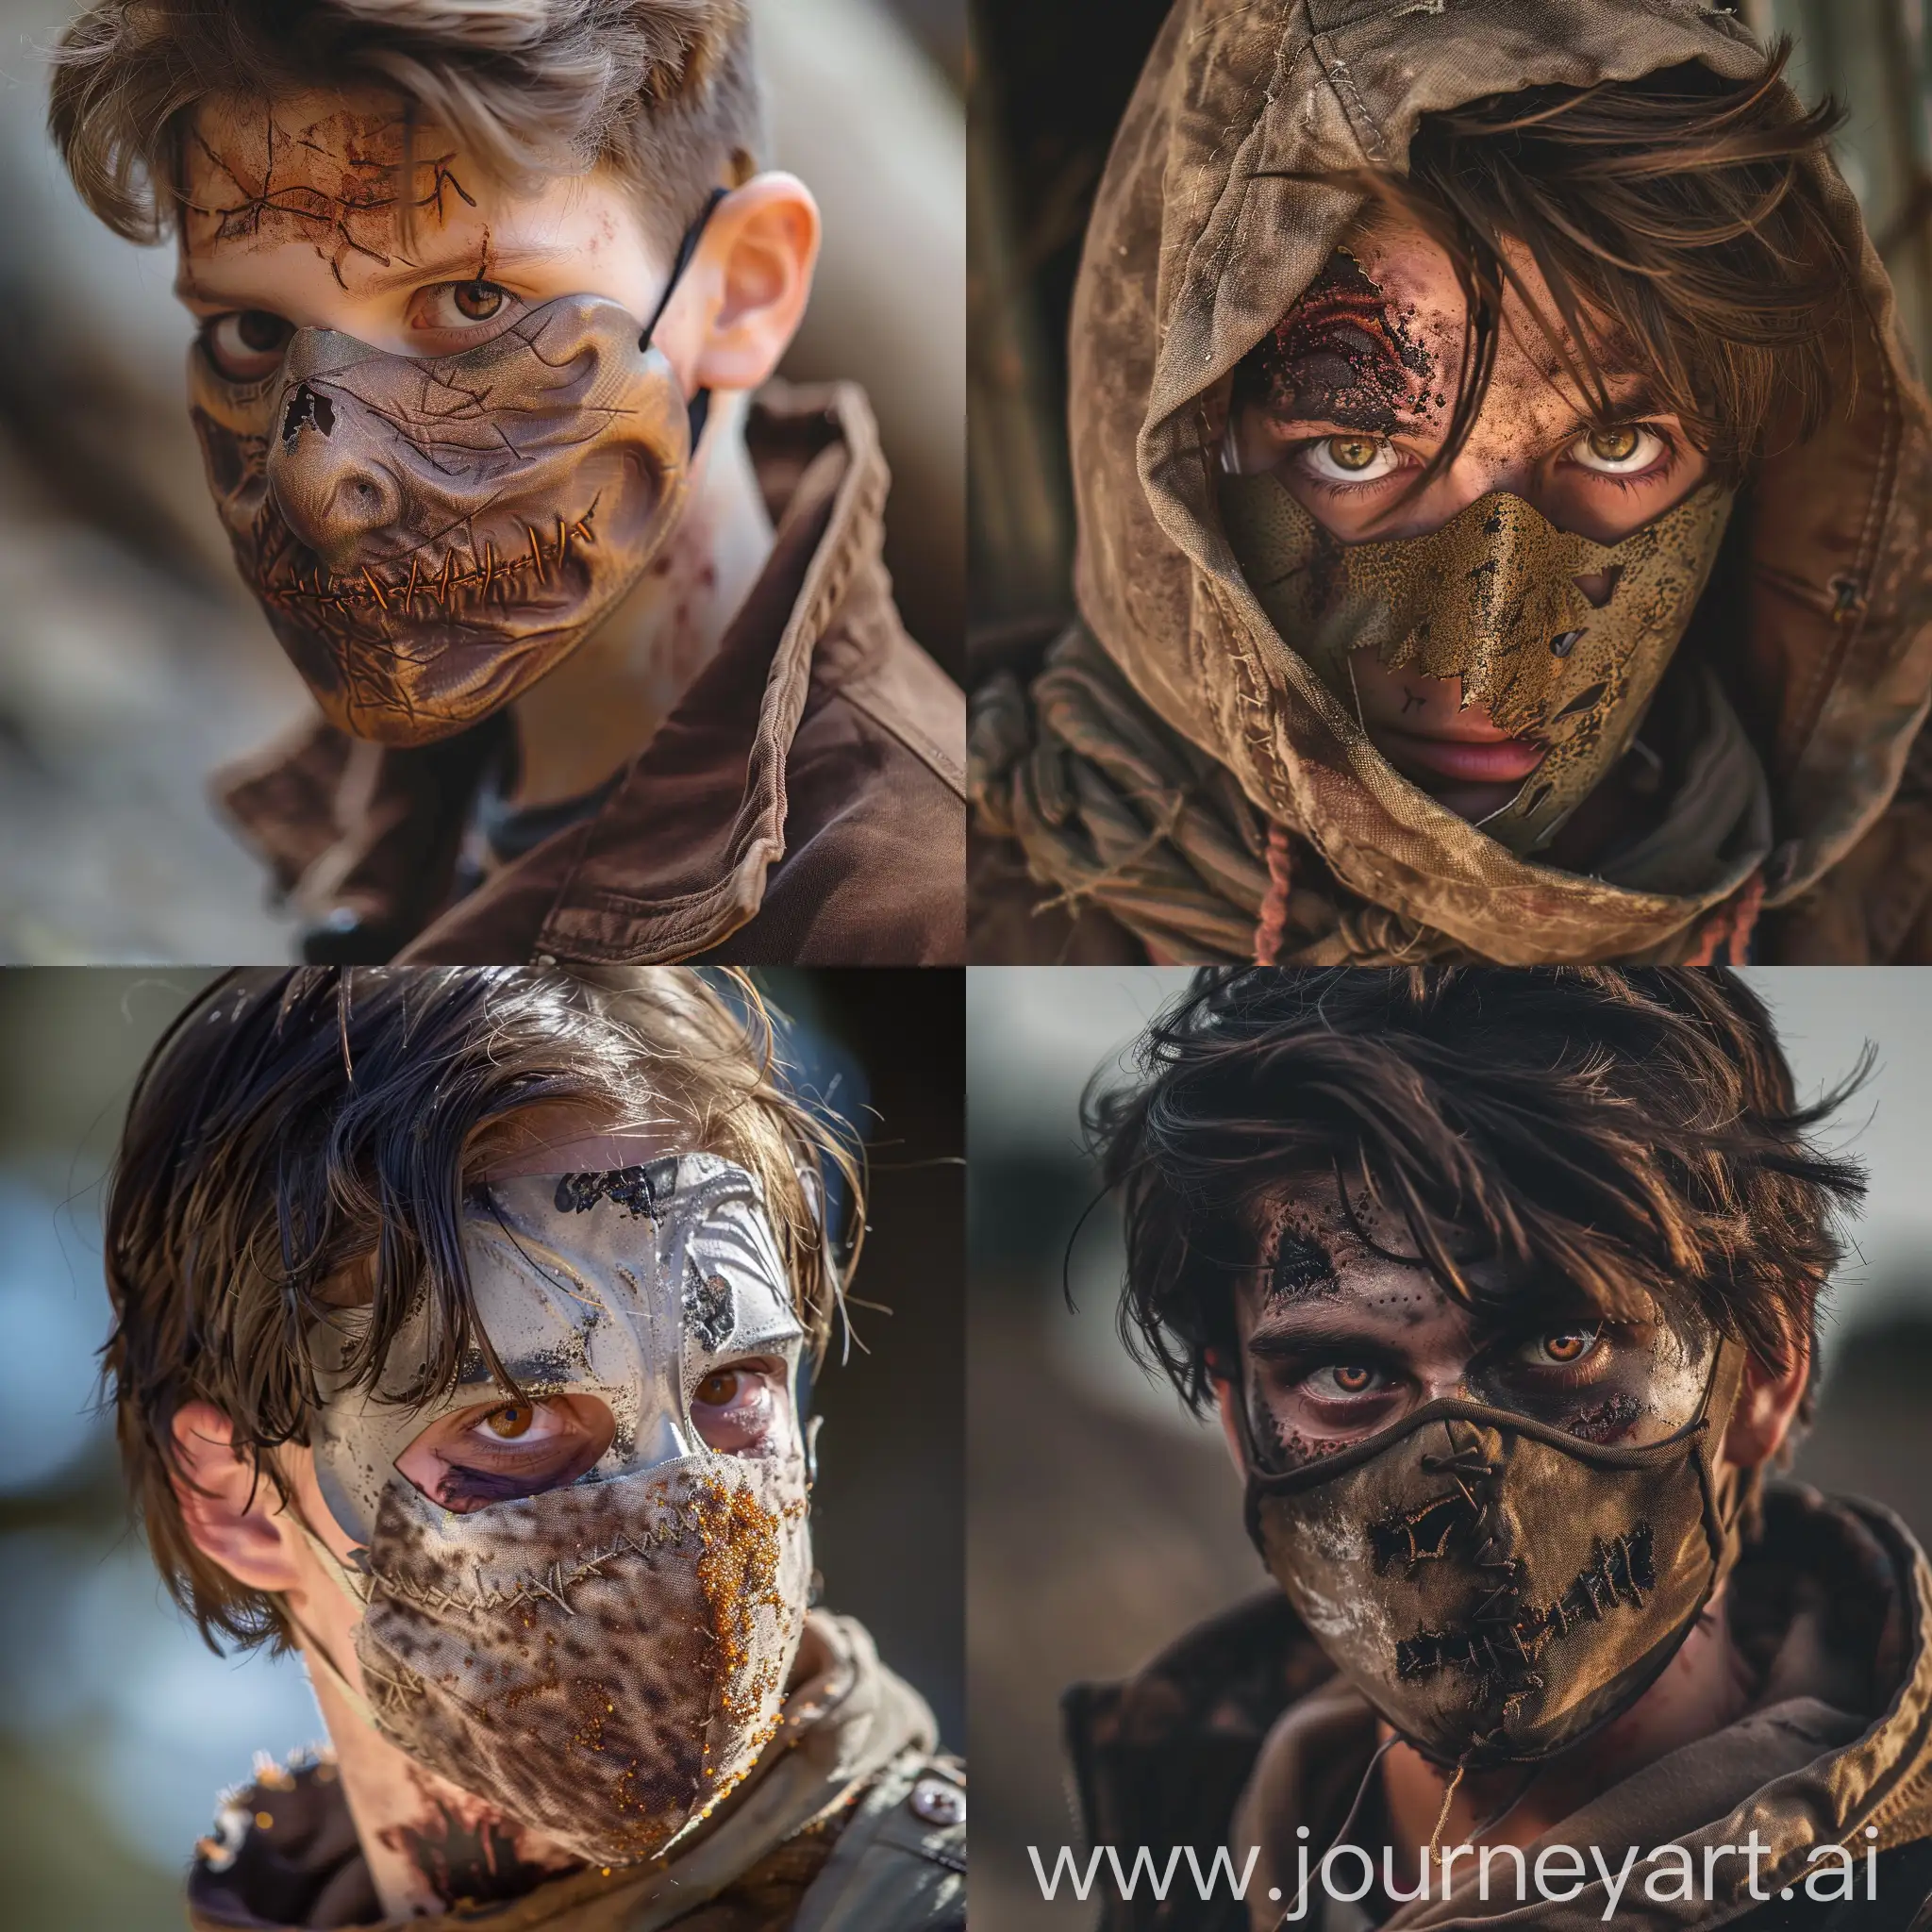 Teen-Zombie-Man-in-Brown-Jacket-with-Mask-Brown-Eyes-and-Hair